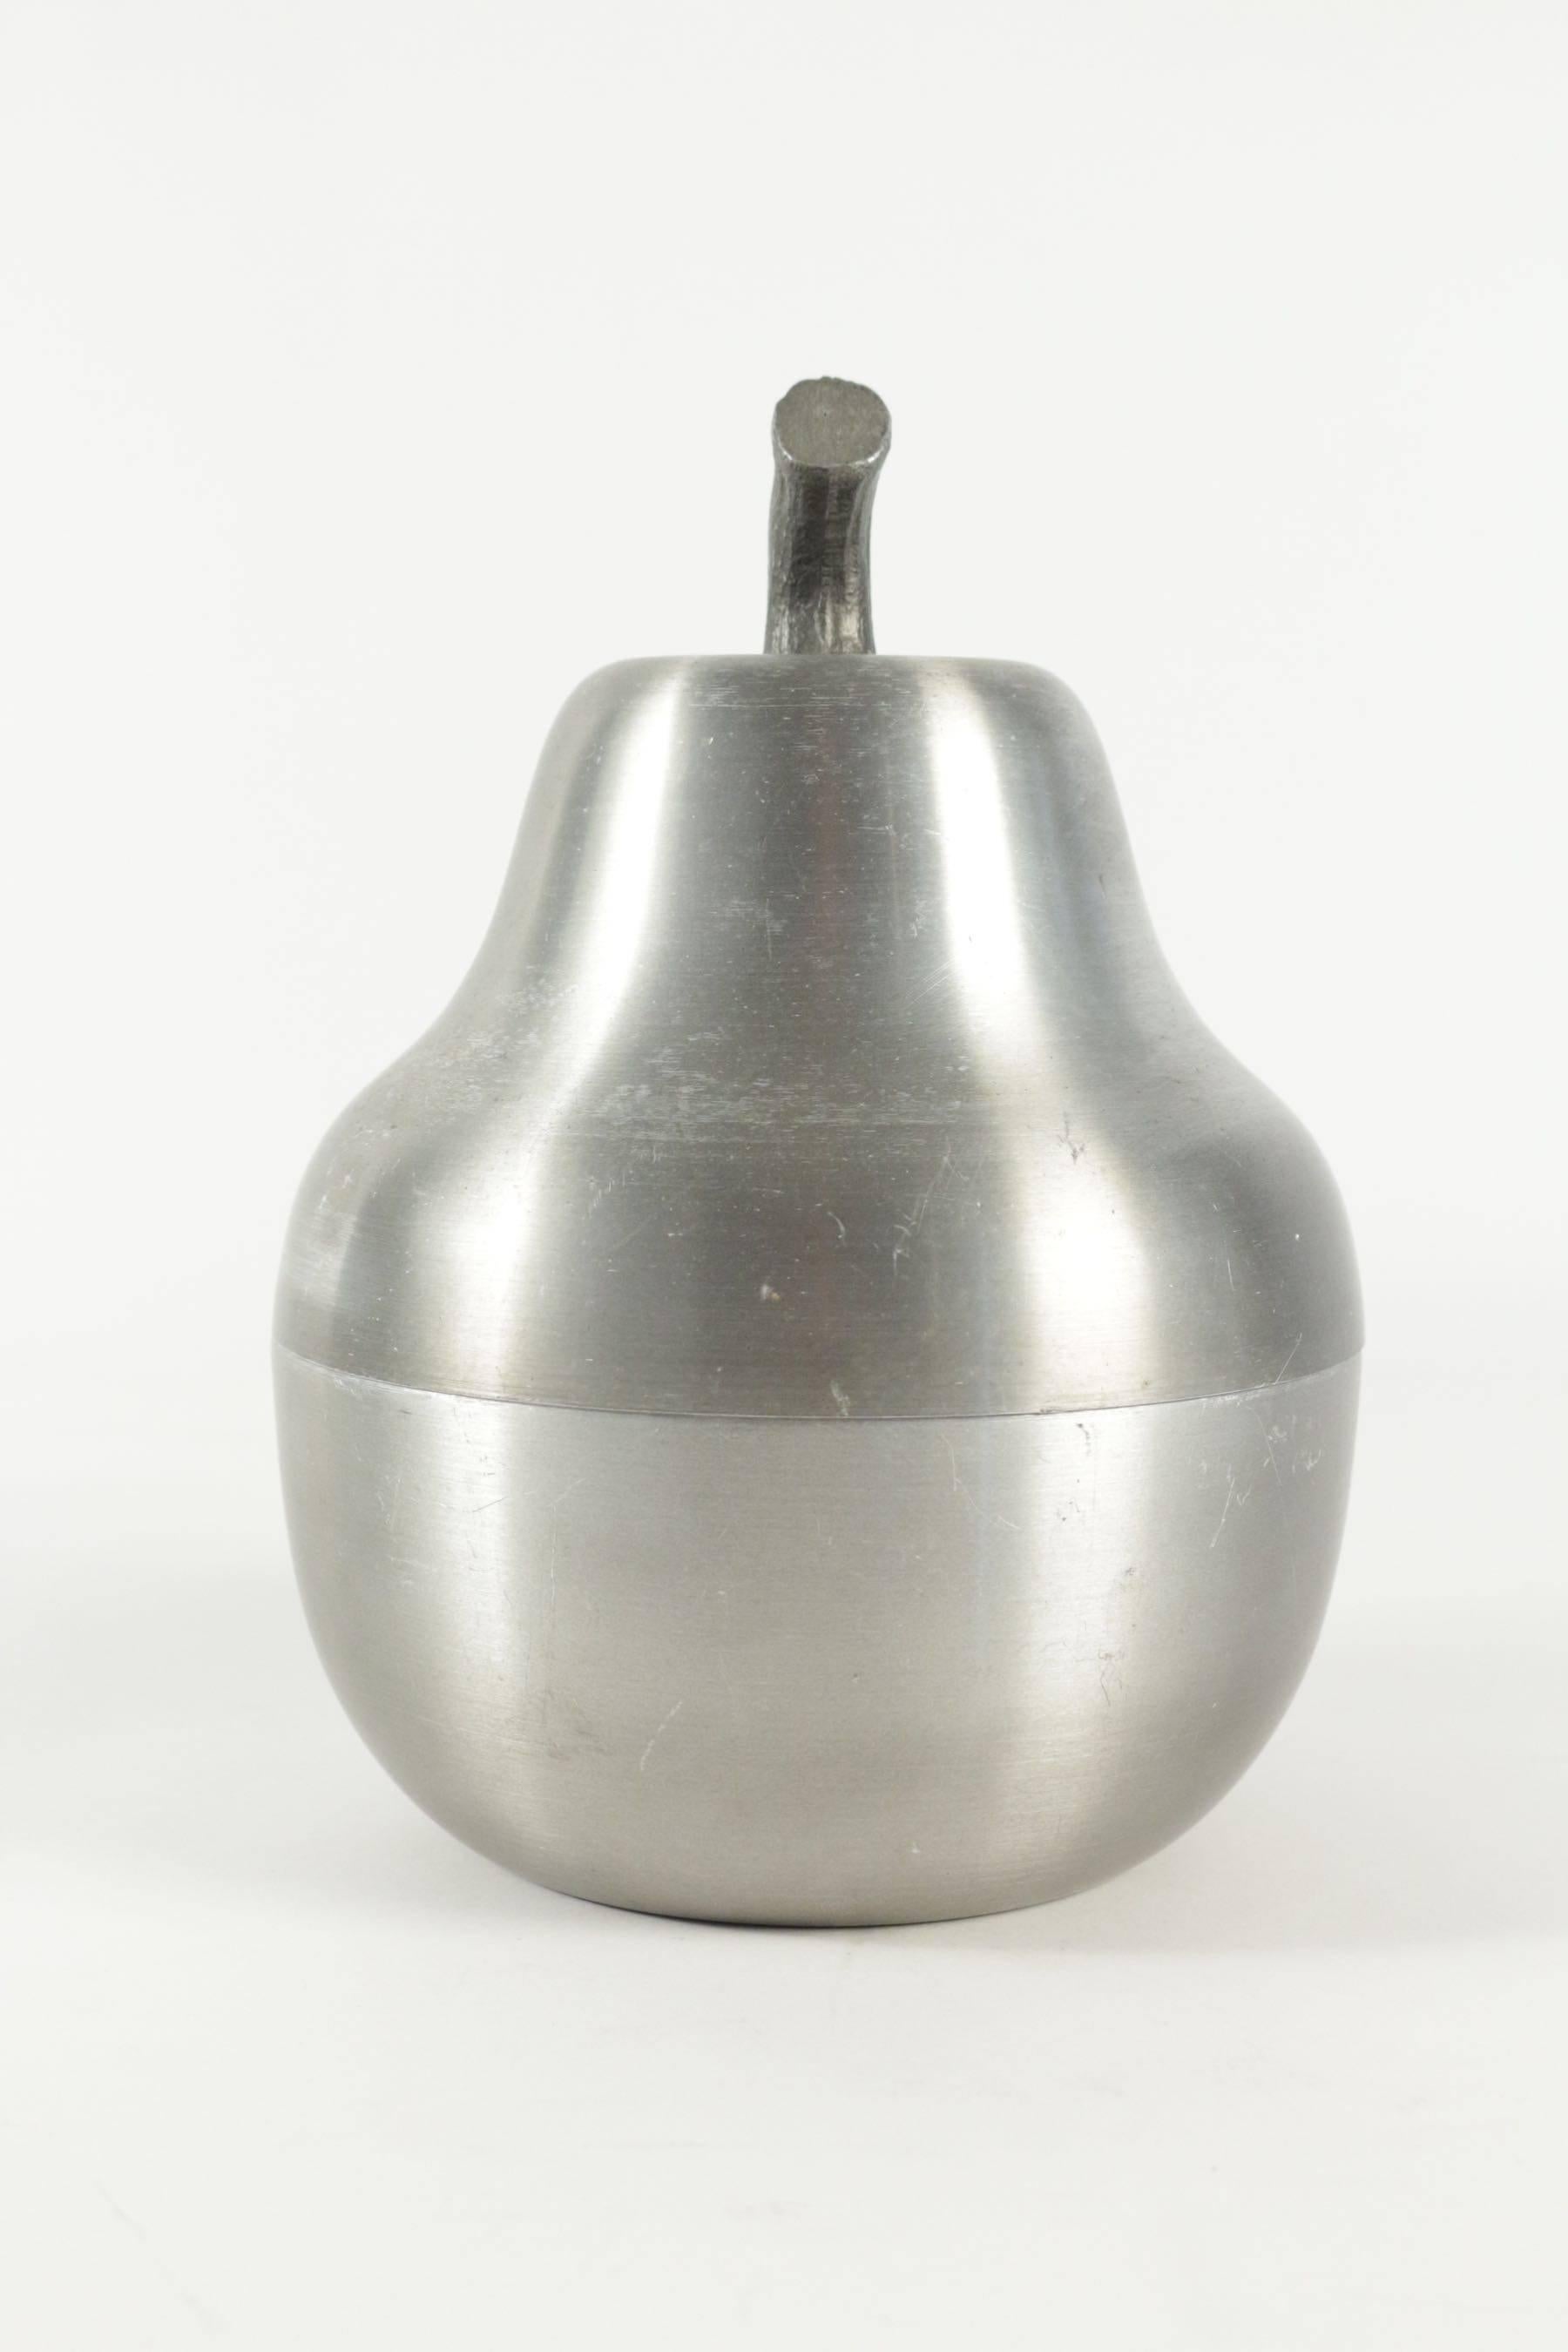 Modern Cool Ice Bucket in the Shape of a Pear in Brushed Aluminum from the 1970s For Sale